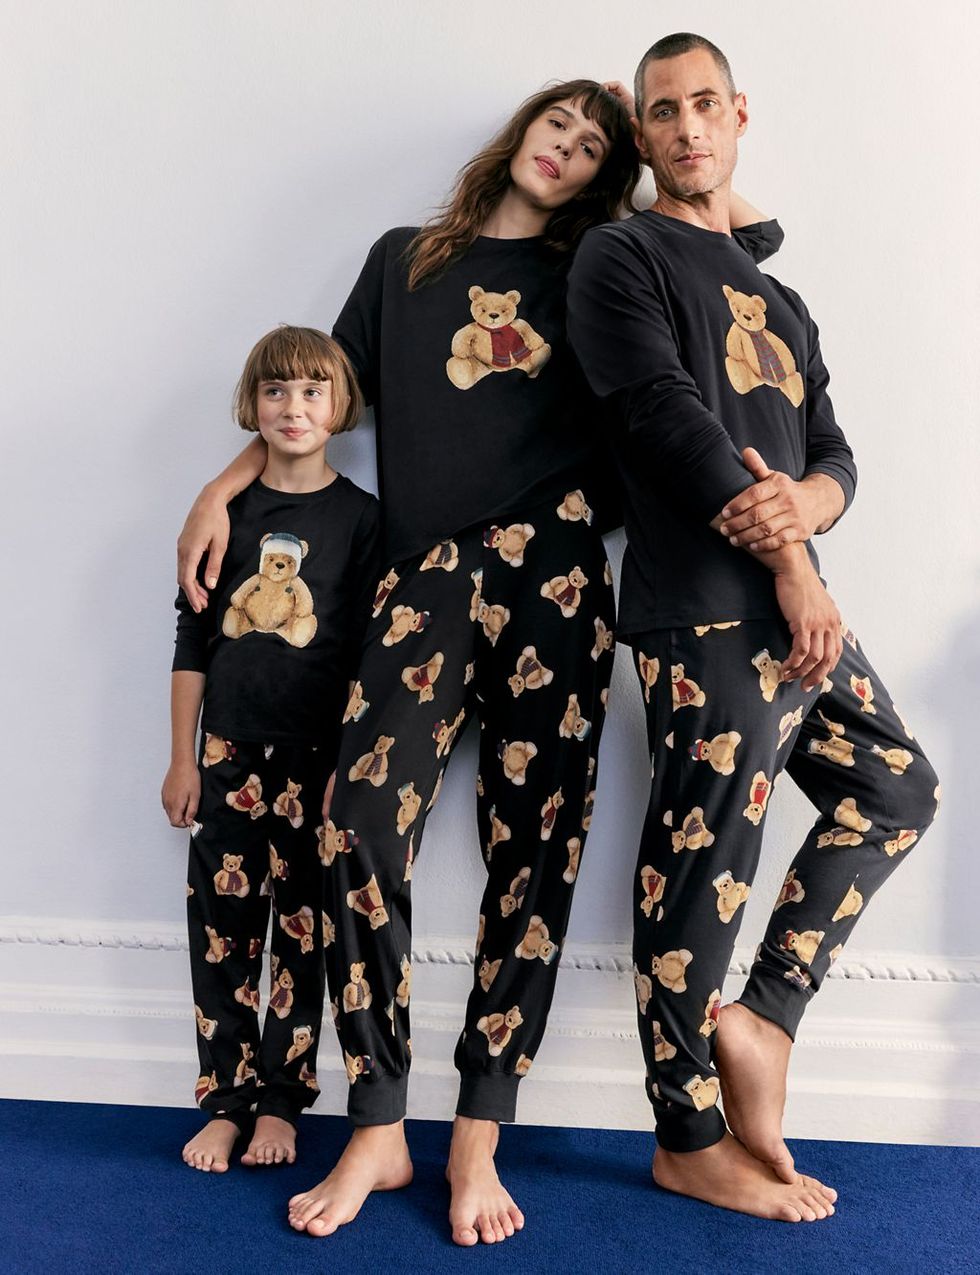 Matching Couple Pajamas: Cute His And Hers PJ Sets On Sale